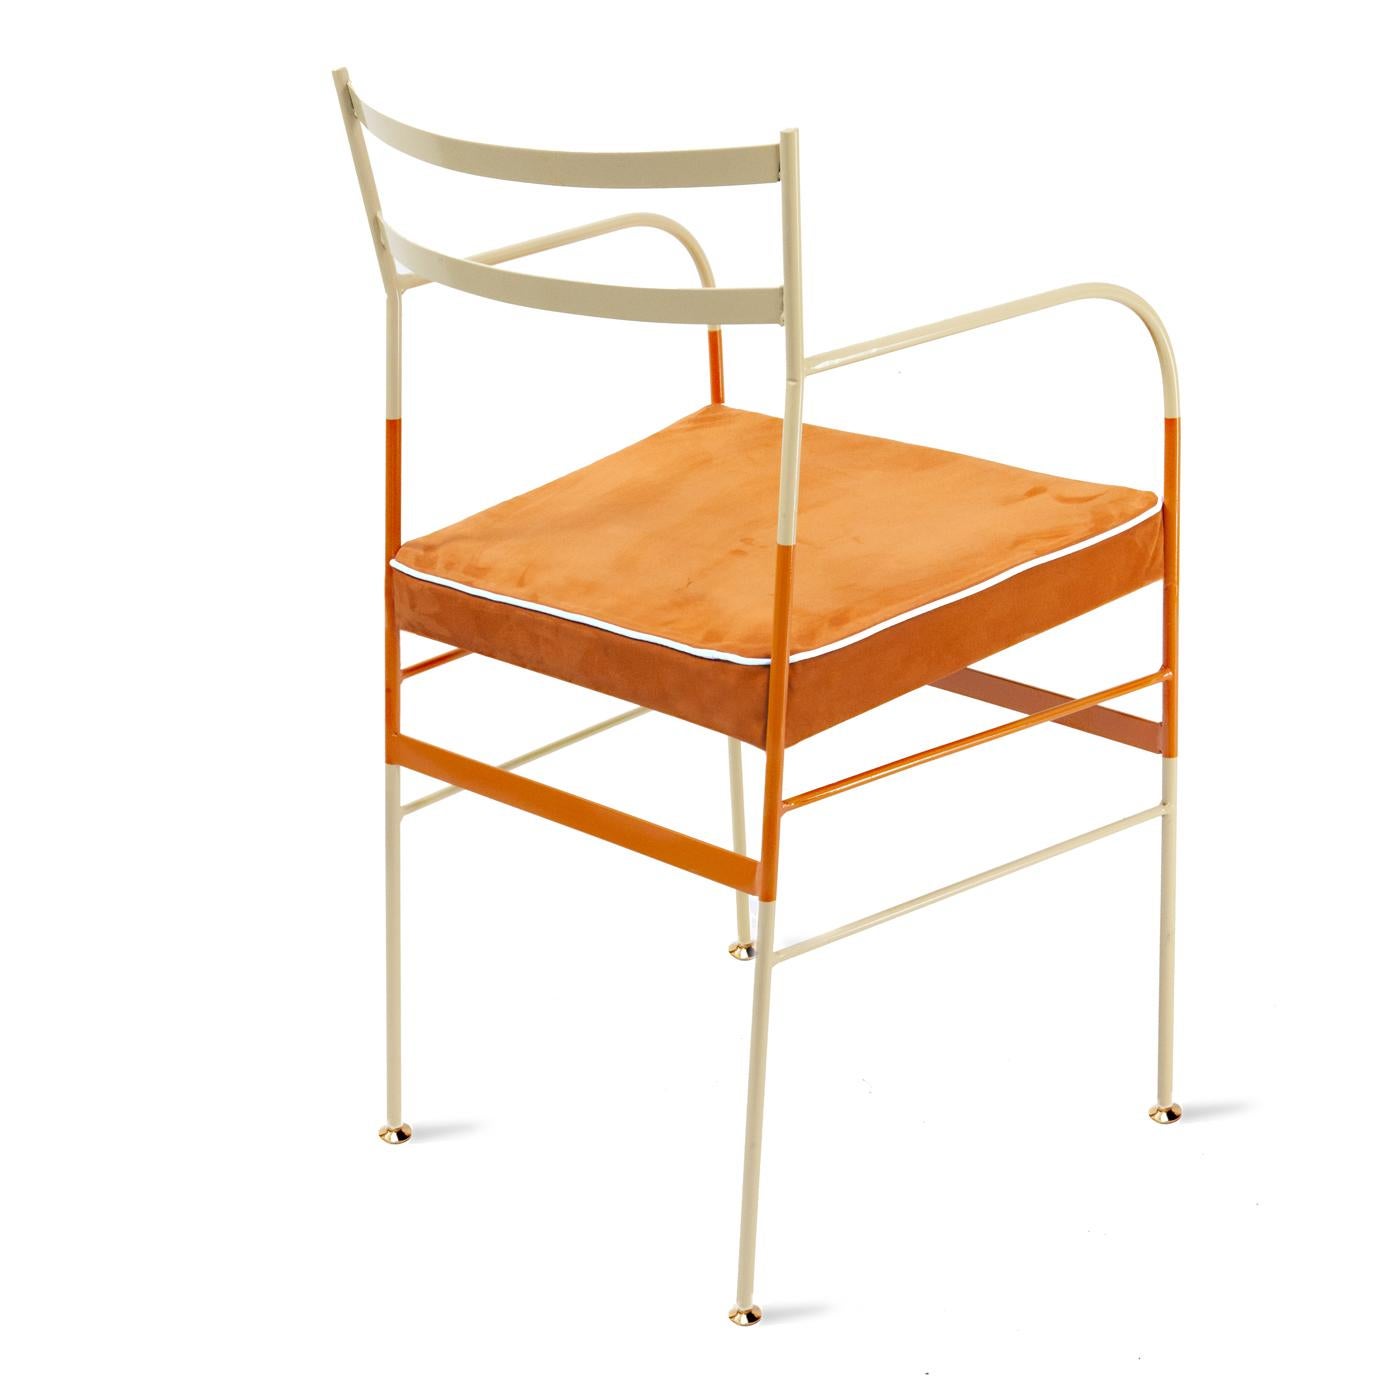 Suede piping on contrasting bright tones produces a neo-retro quality, finished with a uniquely organic compound paint and polish to prevent rust. Handcrafted in Italy from high-strength iron, these garden chairs by Sotow boast practicality and